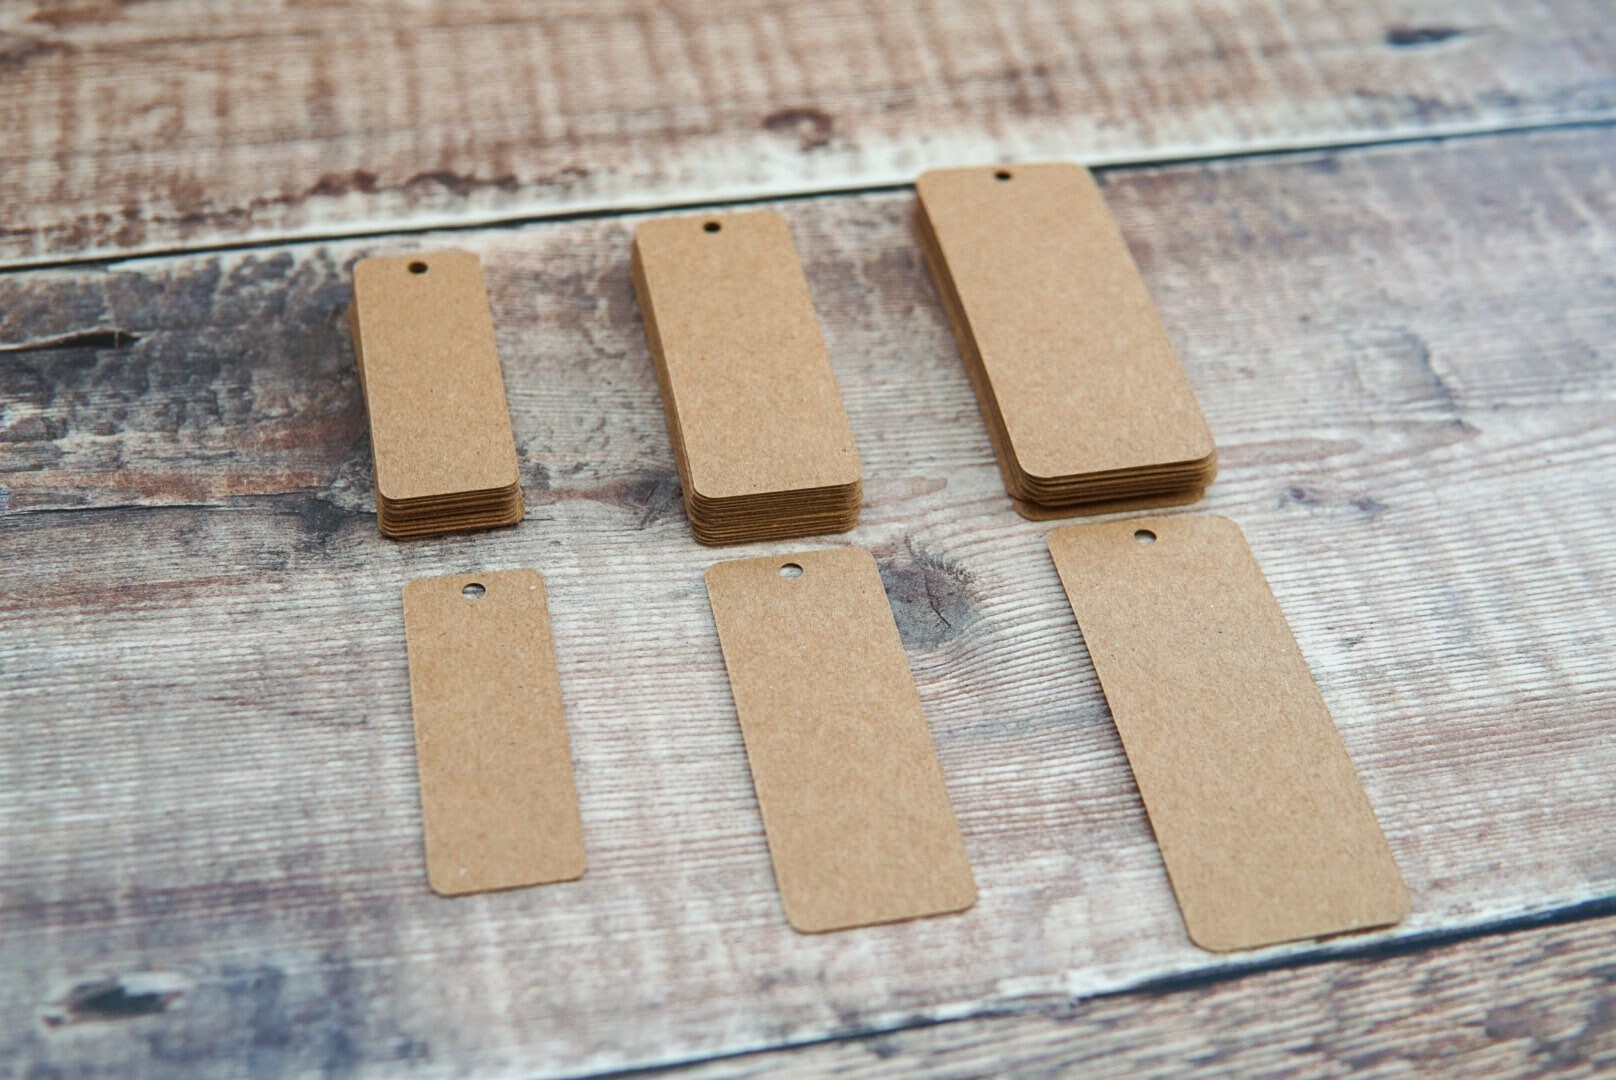 30 Vintage-inspired Recycled Brown Kraft Card Rustic Luggage Tags 70mm X  35mm Reinforced Ring Tag With String Price Name Tags 